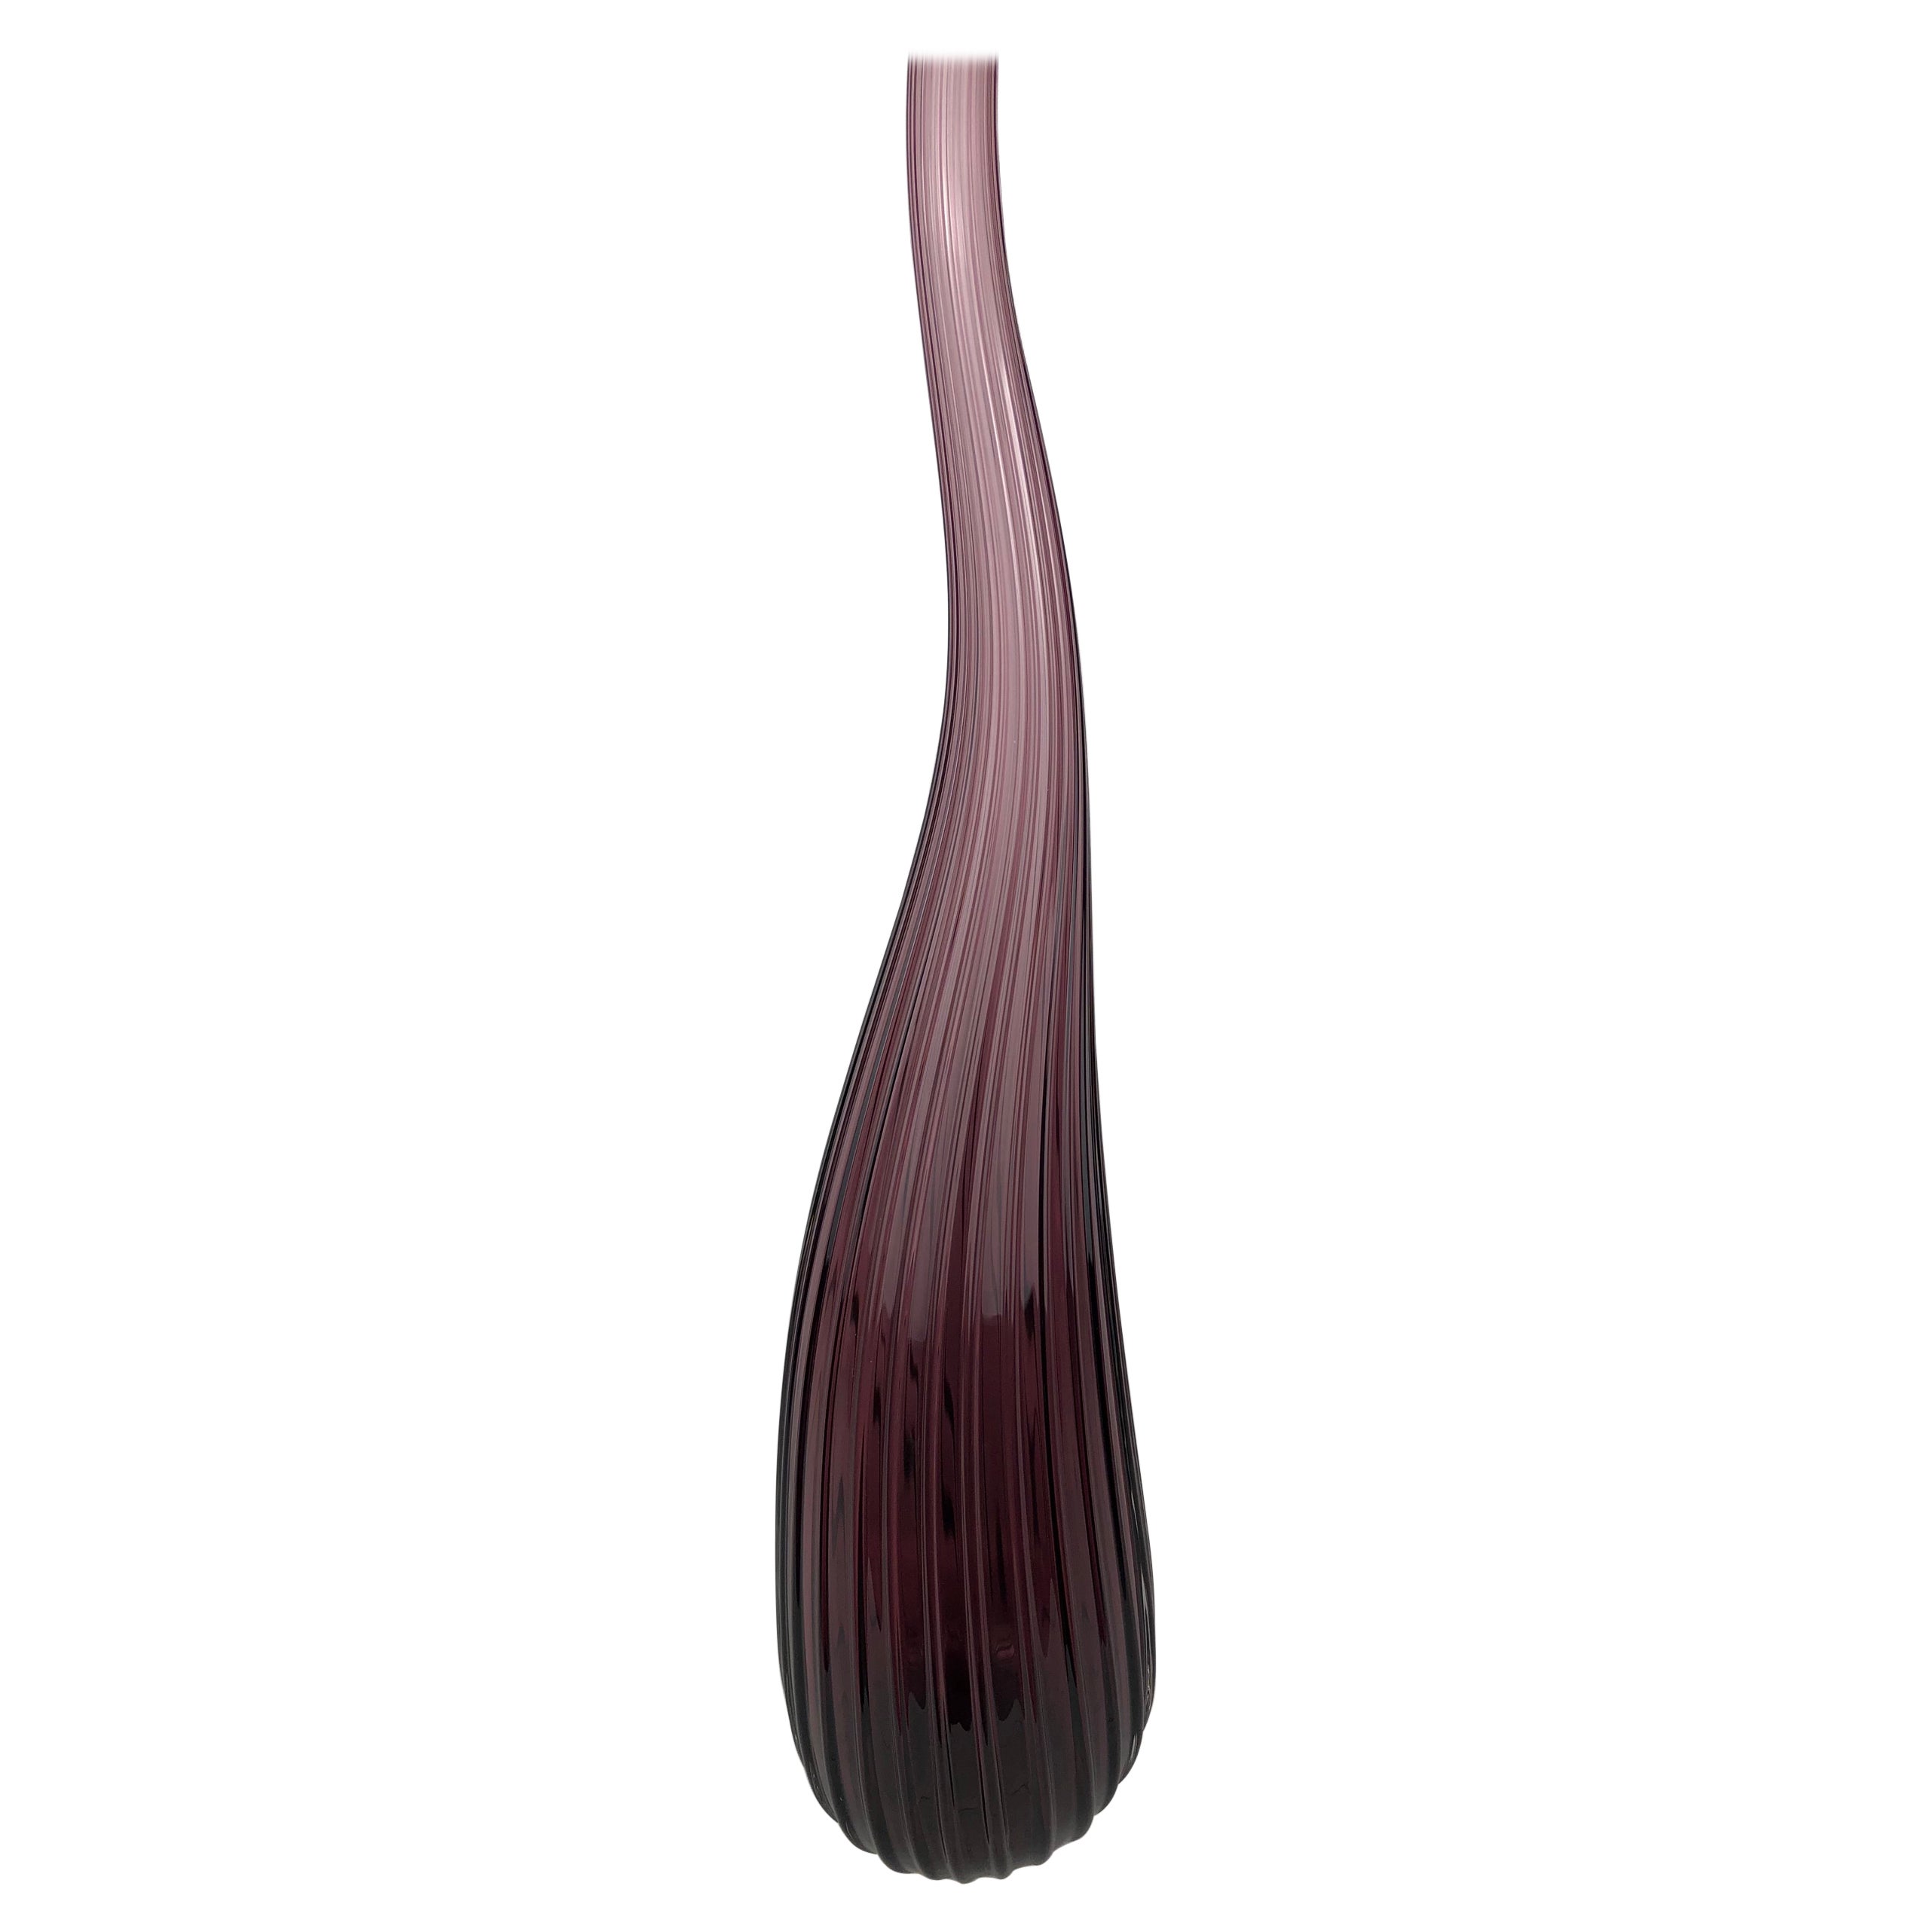 Large Salviati Murano Aria Vase in Amethyst Glass Mouth Blown